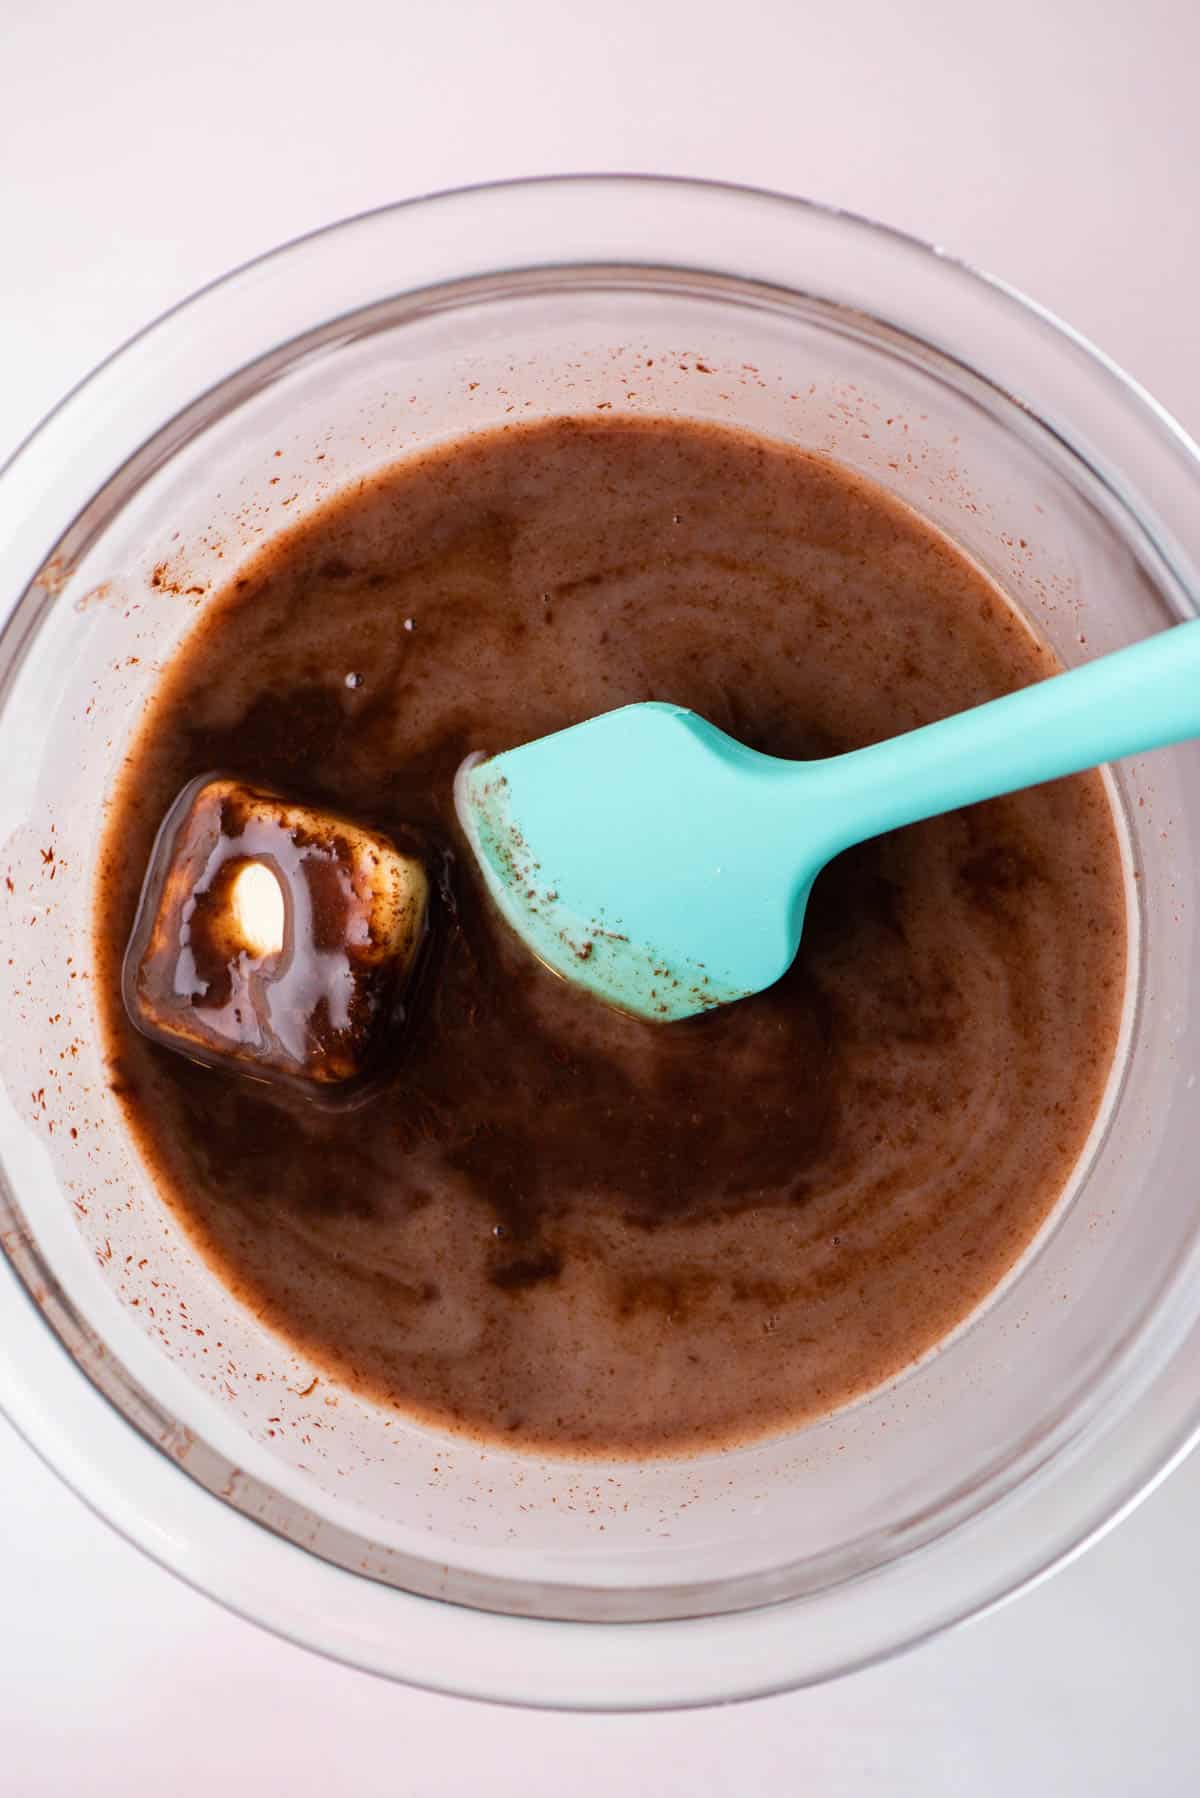 hot fudge sauce being made in a glass bowl by mixing in butter to the rest of the ingredients using a teal spatula